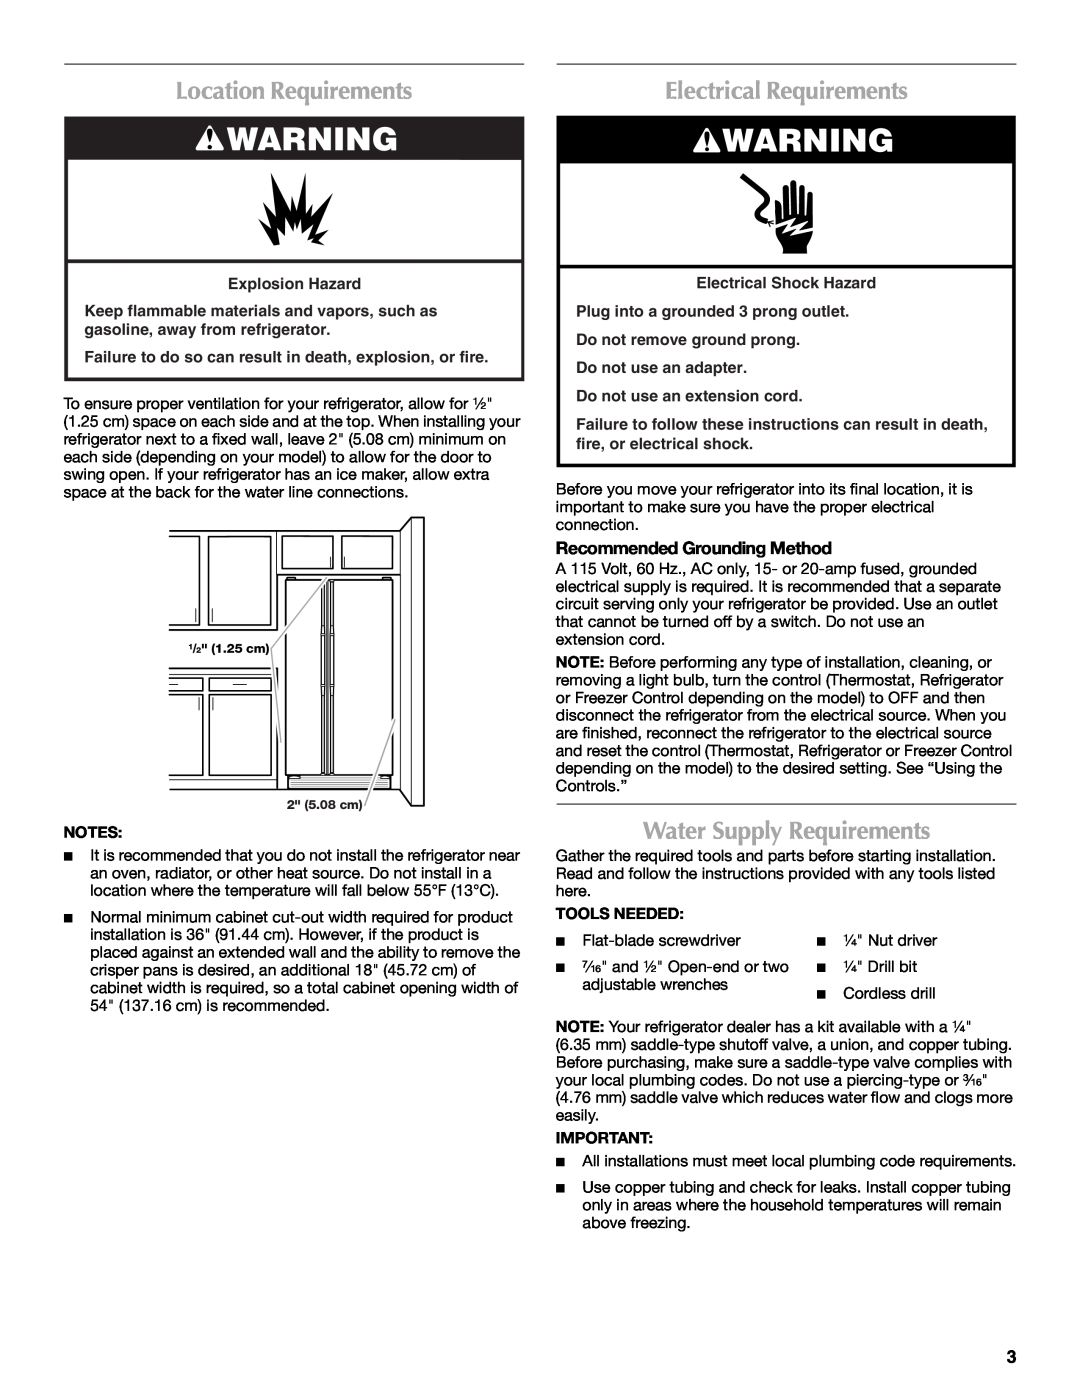 Maytag MSD2272VES Location Requirements, Electrical Requirements, Water Supply Requirements, Recommended Grounding Method 